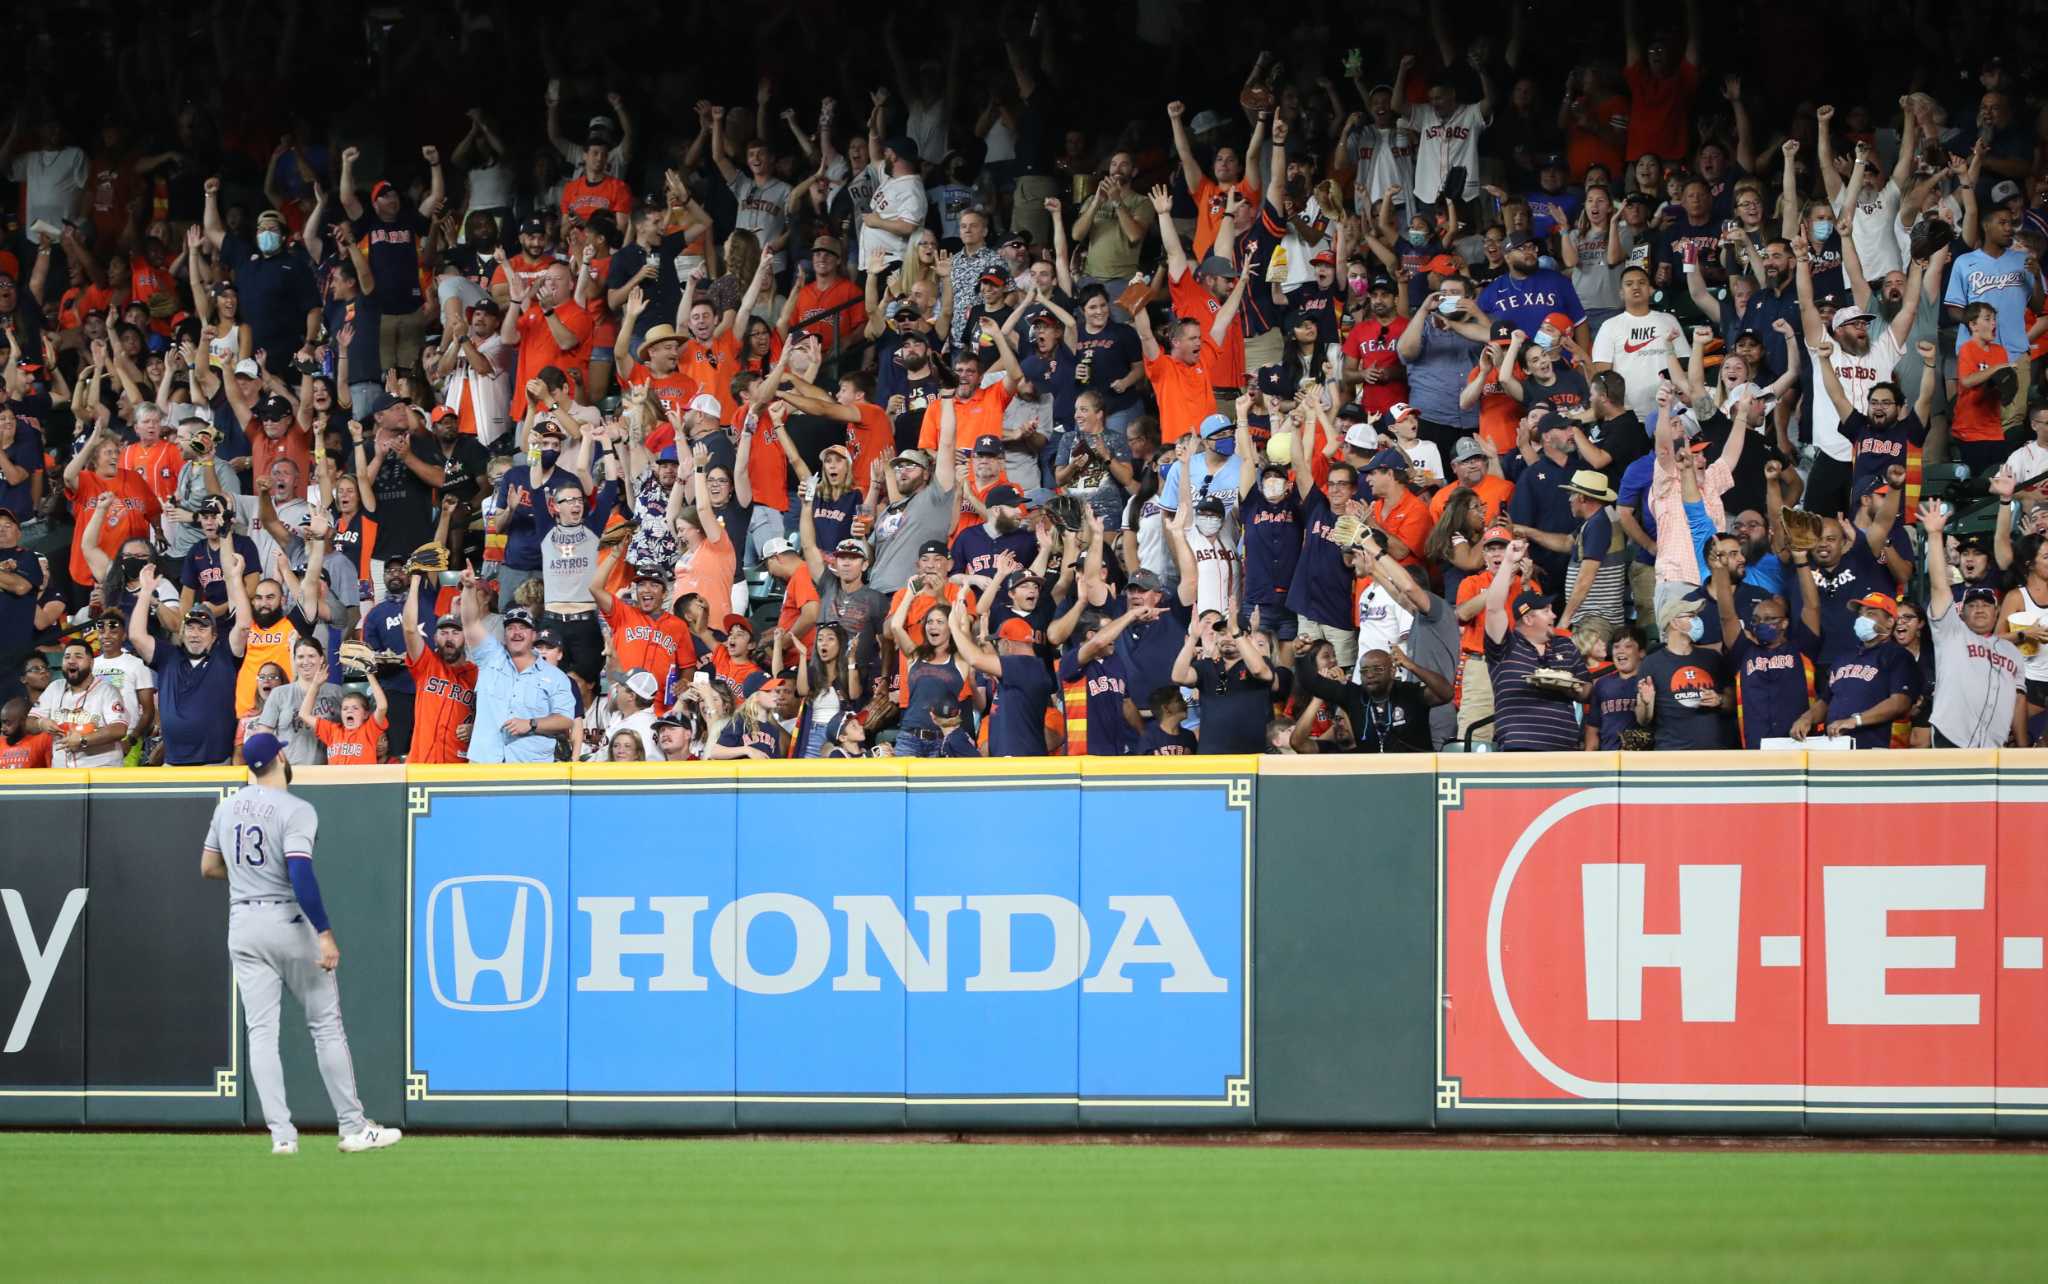 Astros fan acts super suspiciously when caught on camera in viral